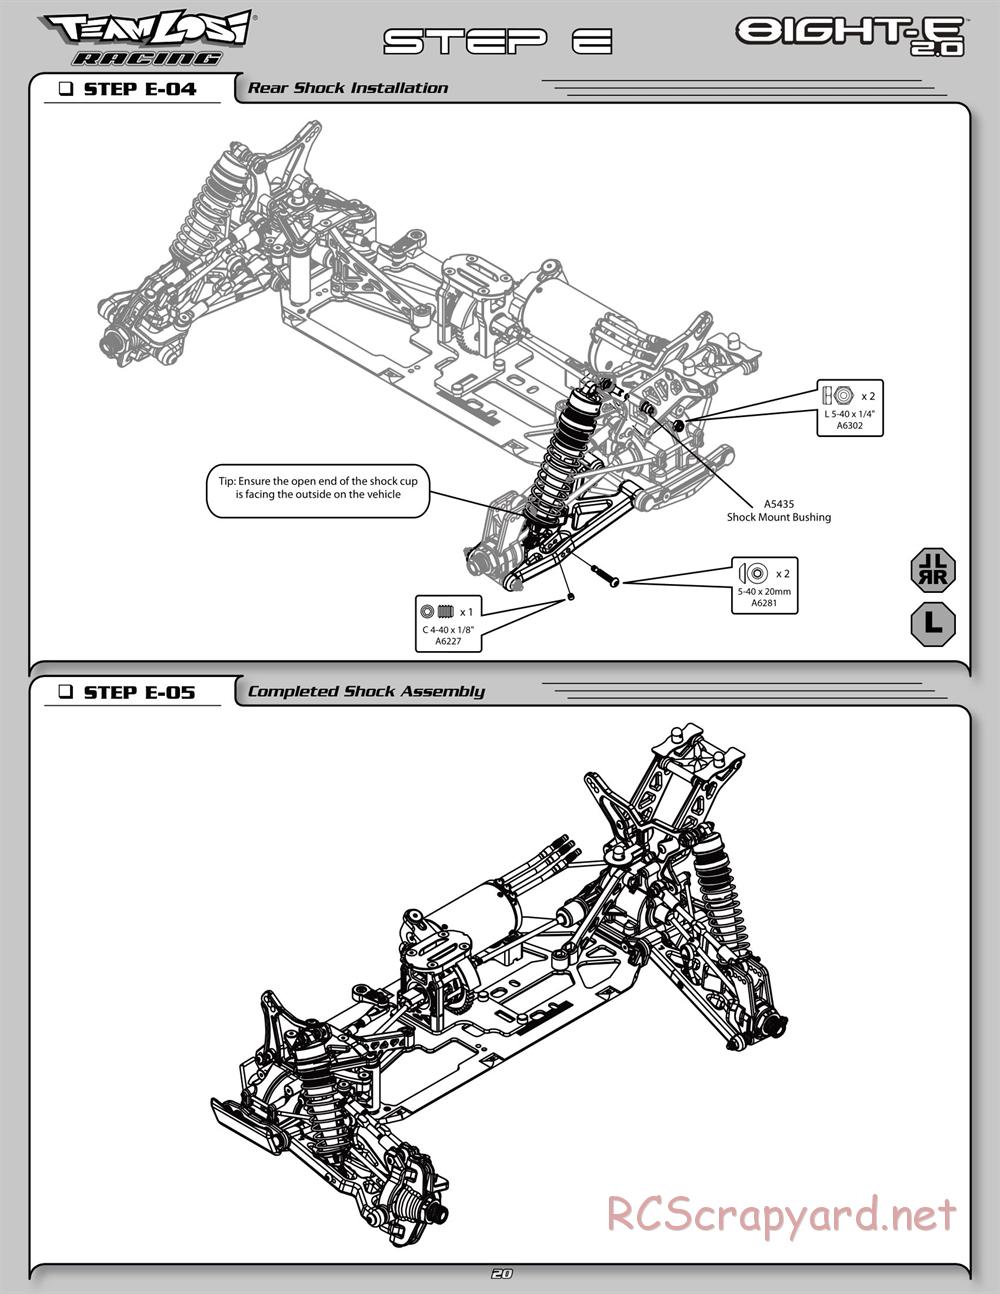 Team Losi - 8ight-E 2.0 Race Roller - Manual - Page 27